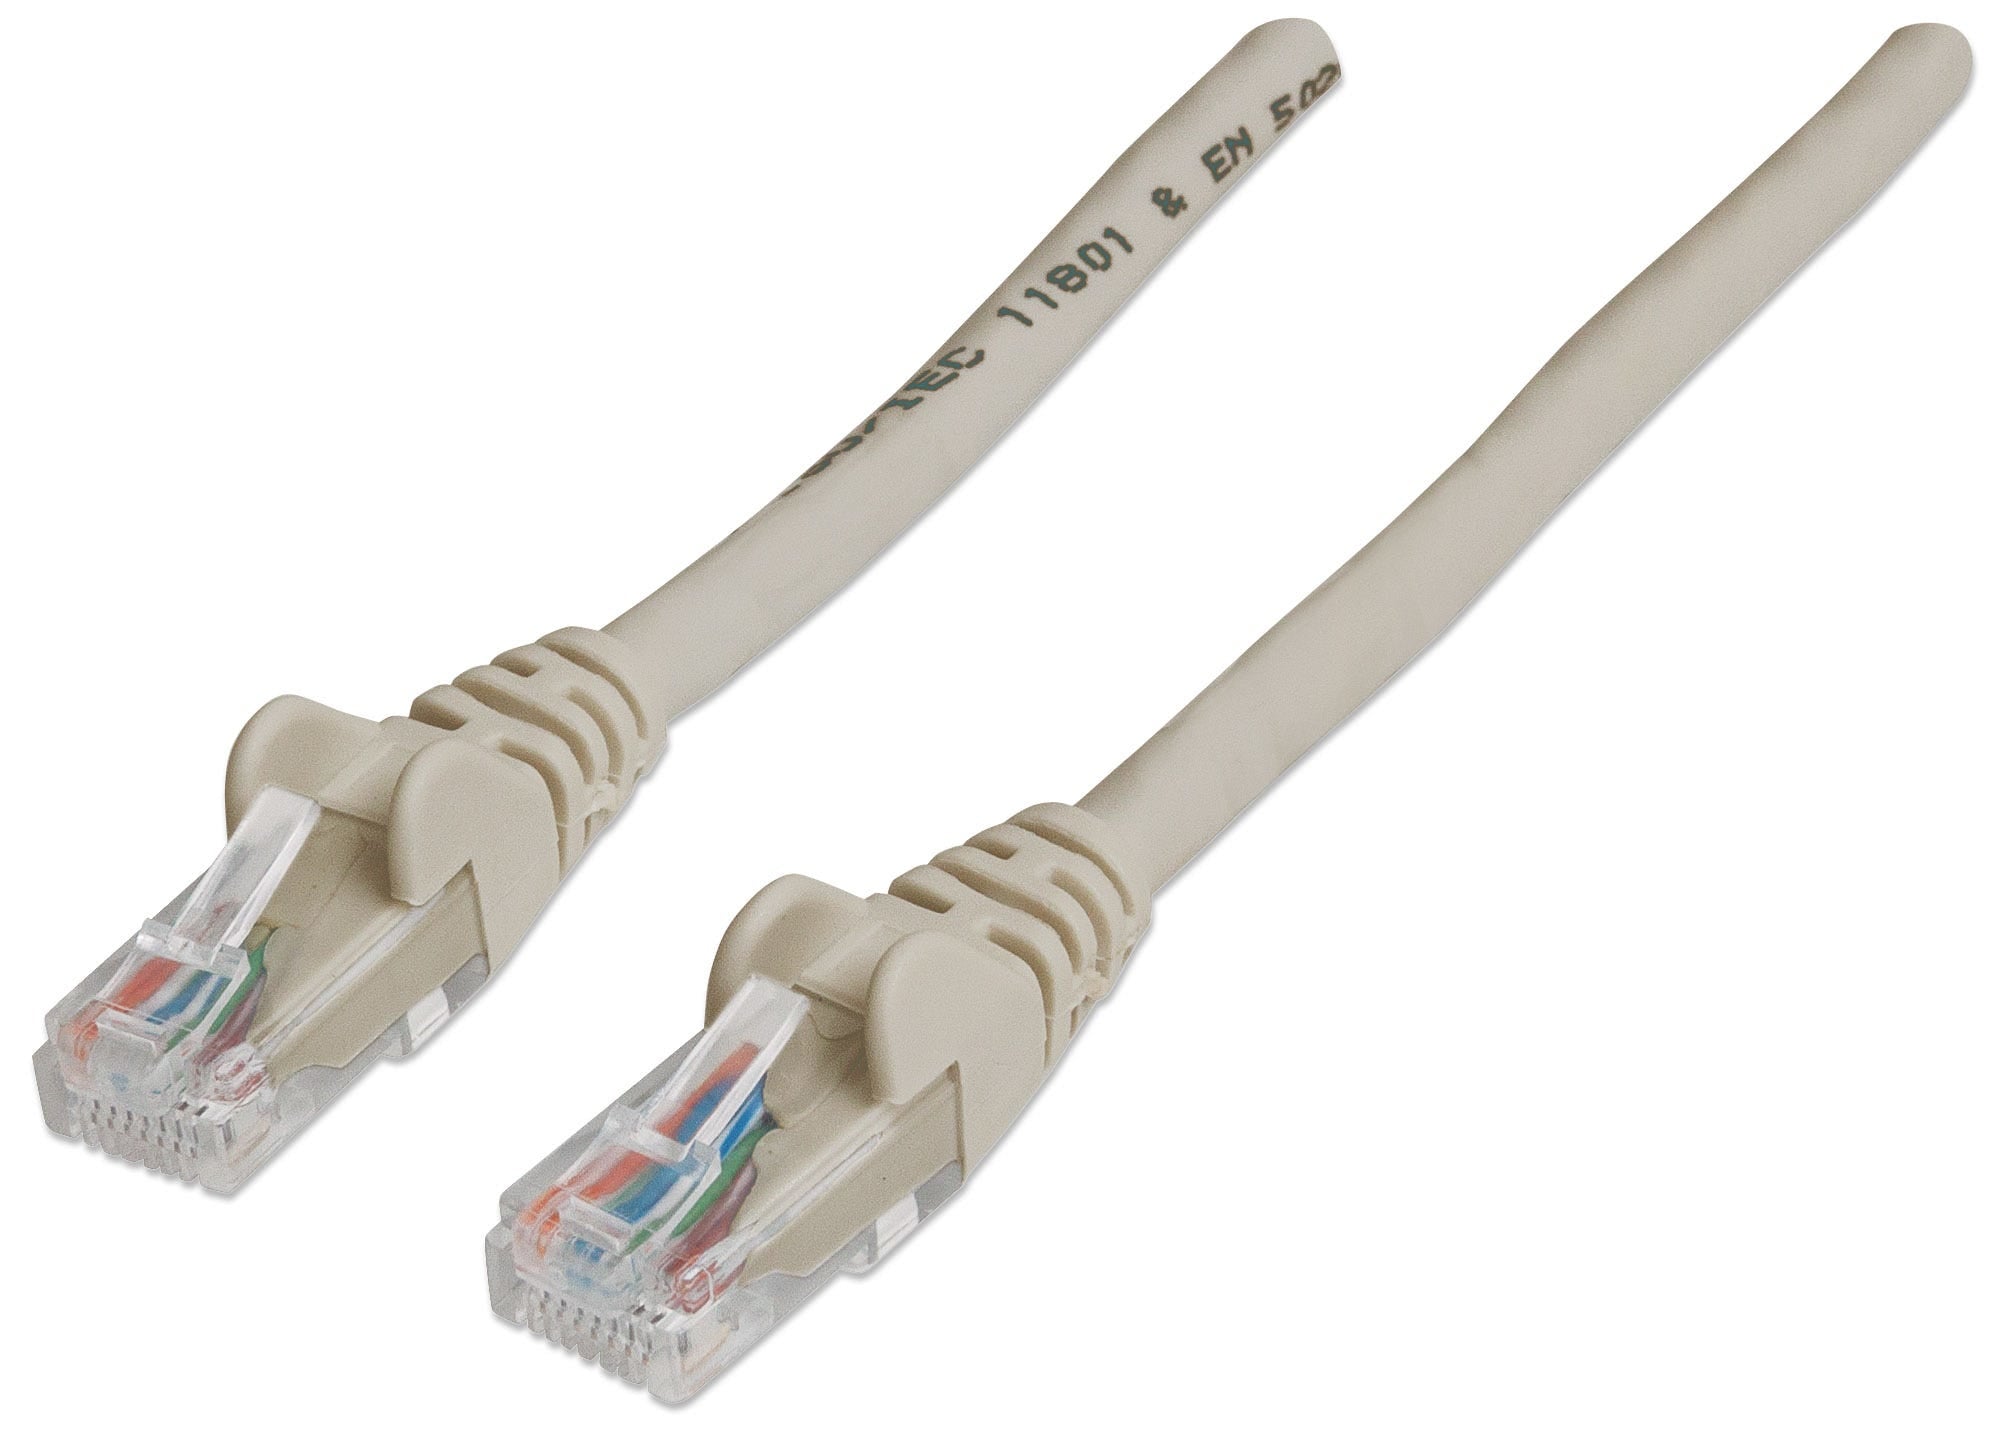 Intellinet Network Patch Cable, Cat6, 20m, Grey, CCA, U/UTP, PVC, RJ45, Gold Plated Contacts, Snagless, Booted, Lifetime Warranty, Polybag